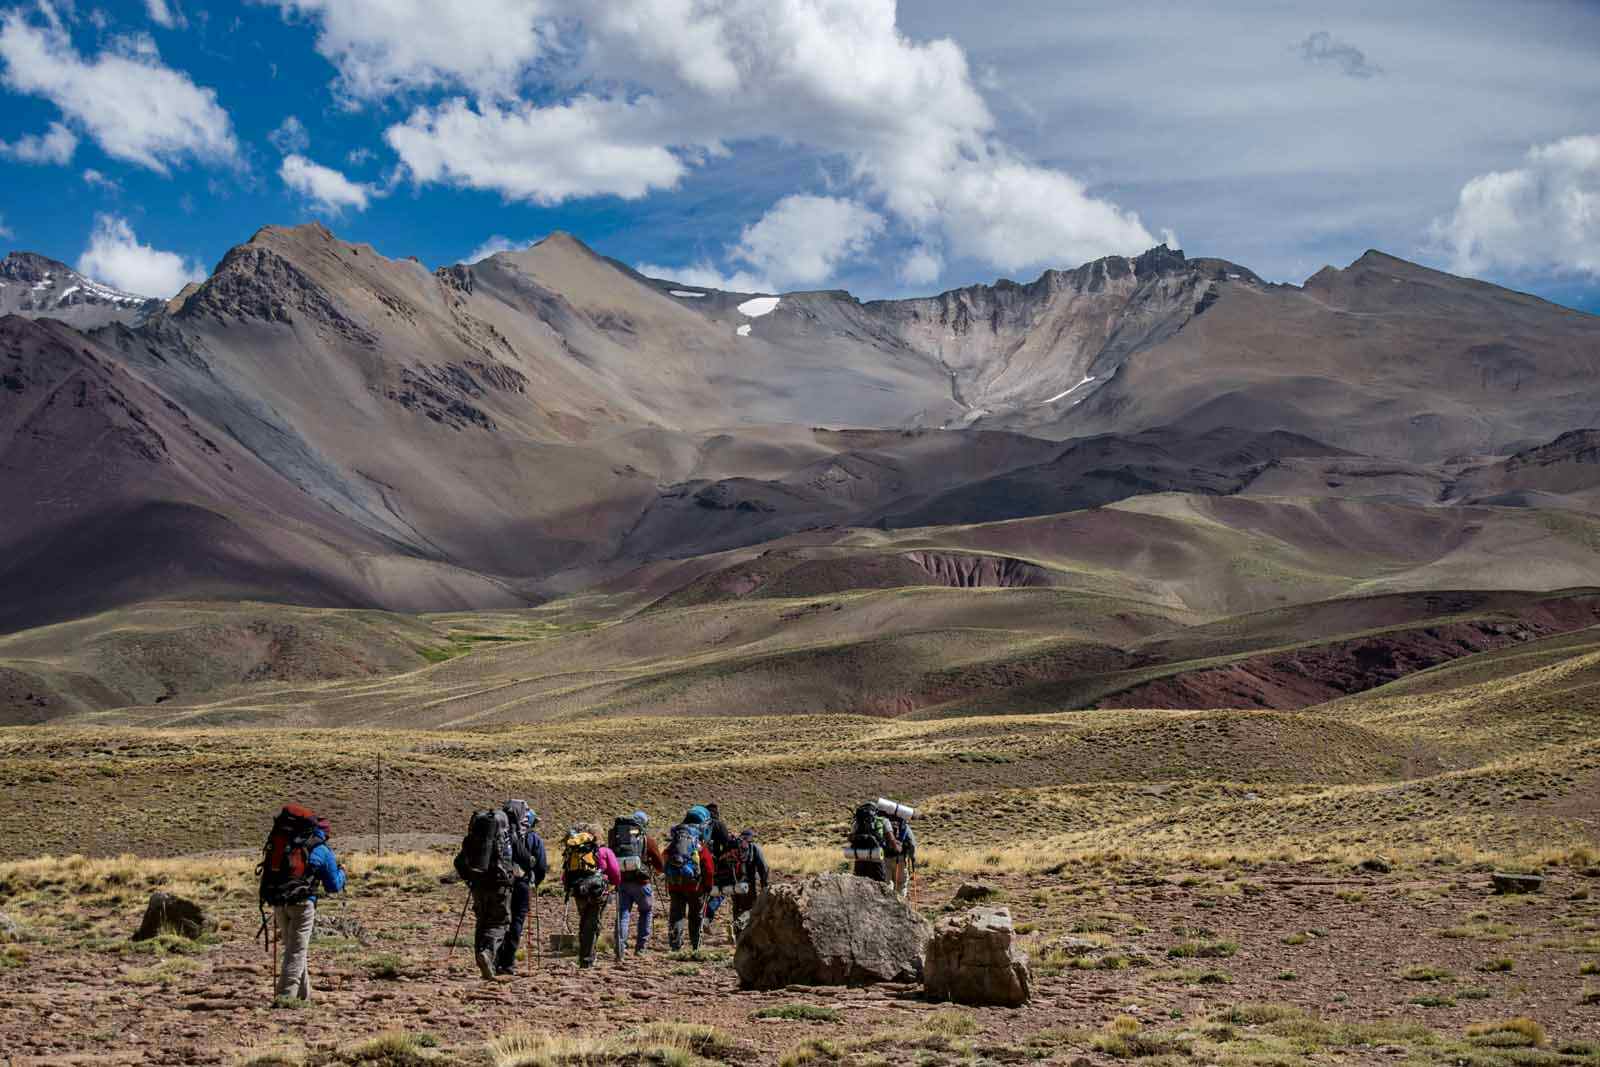 Trekking on the Andes Crossing, Andes-Vertical